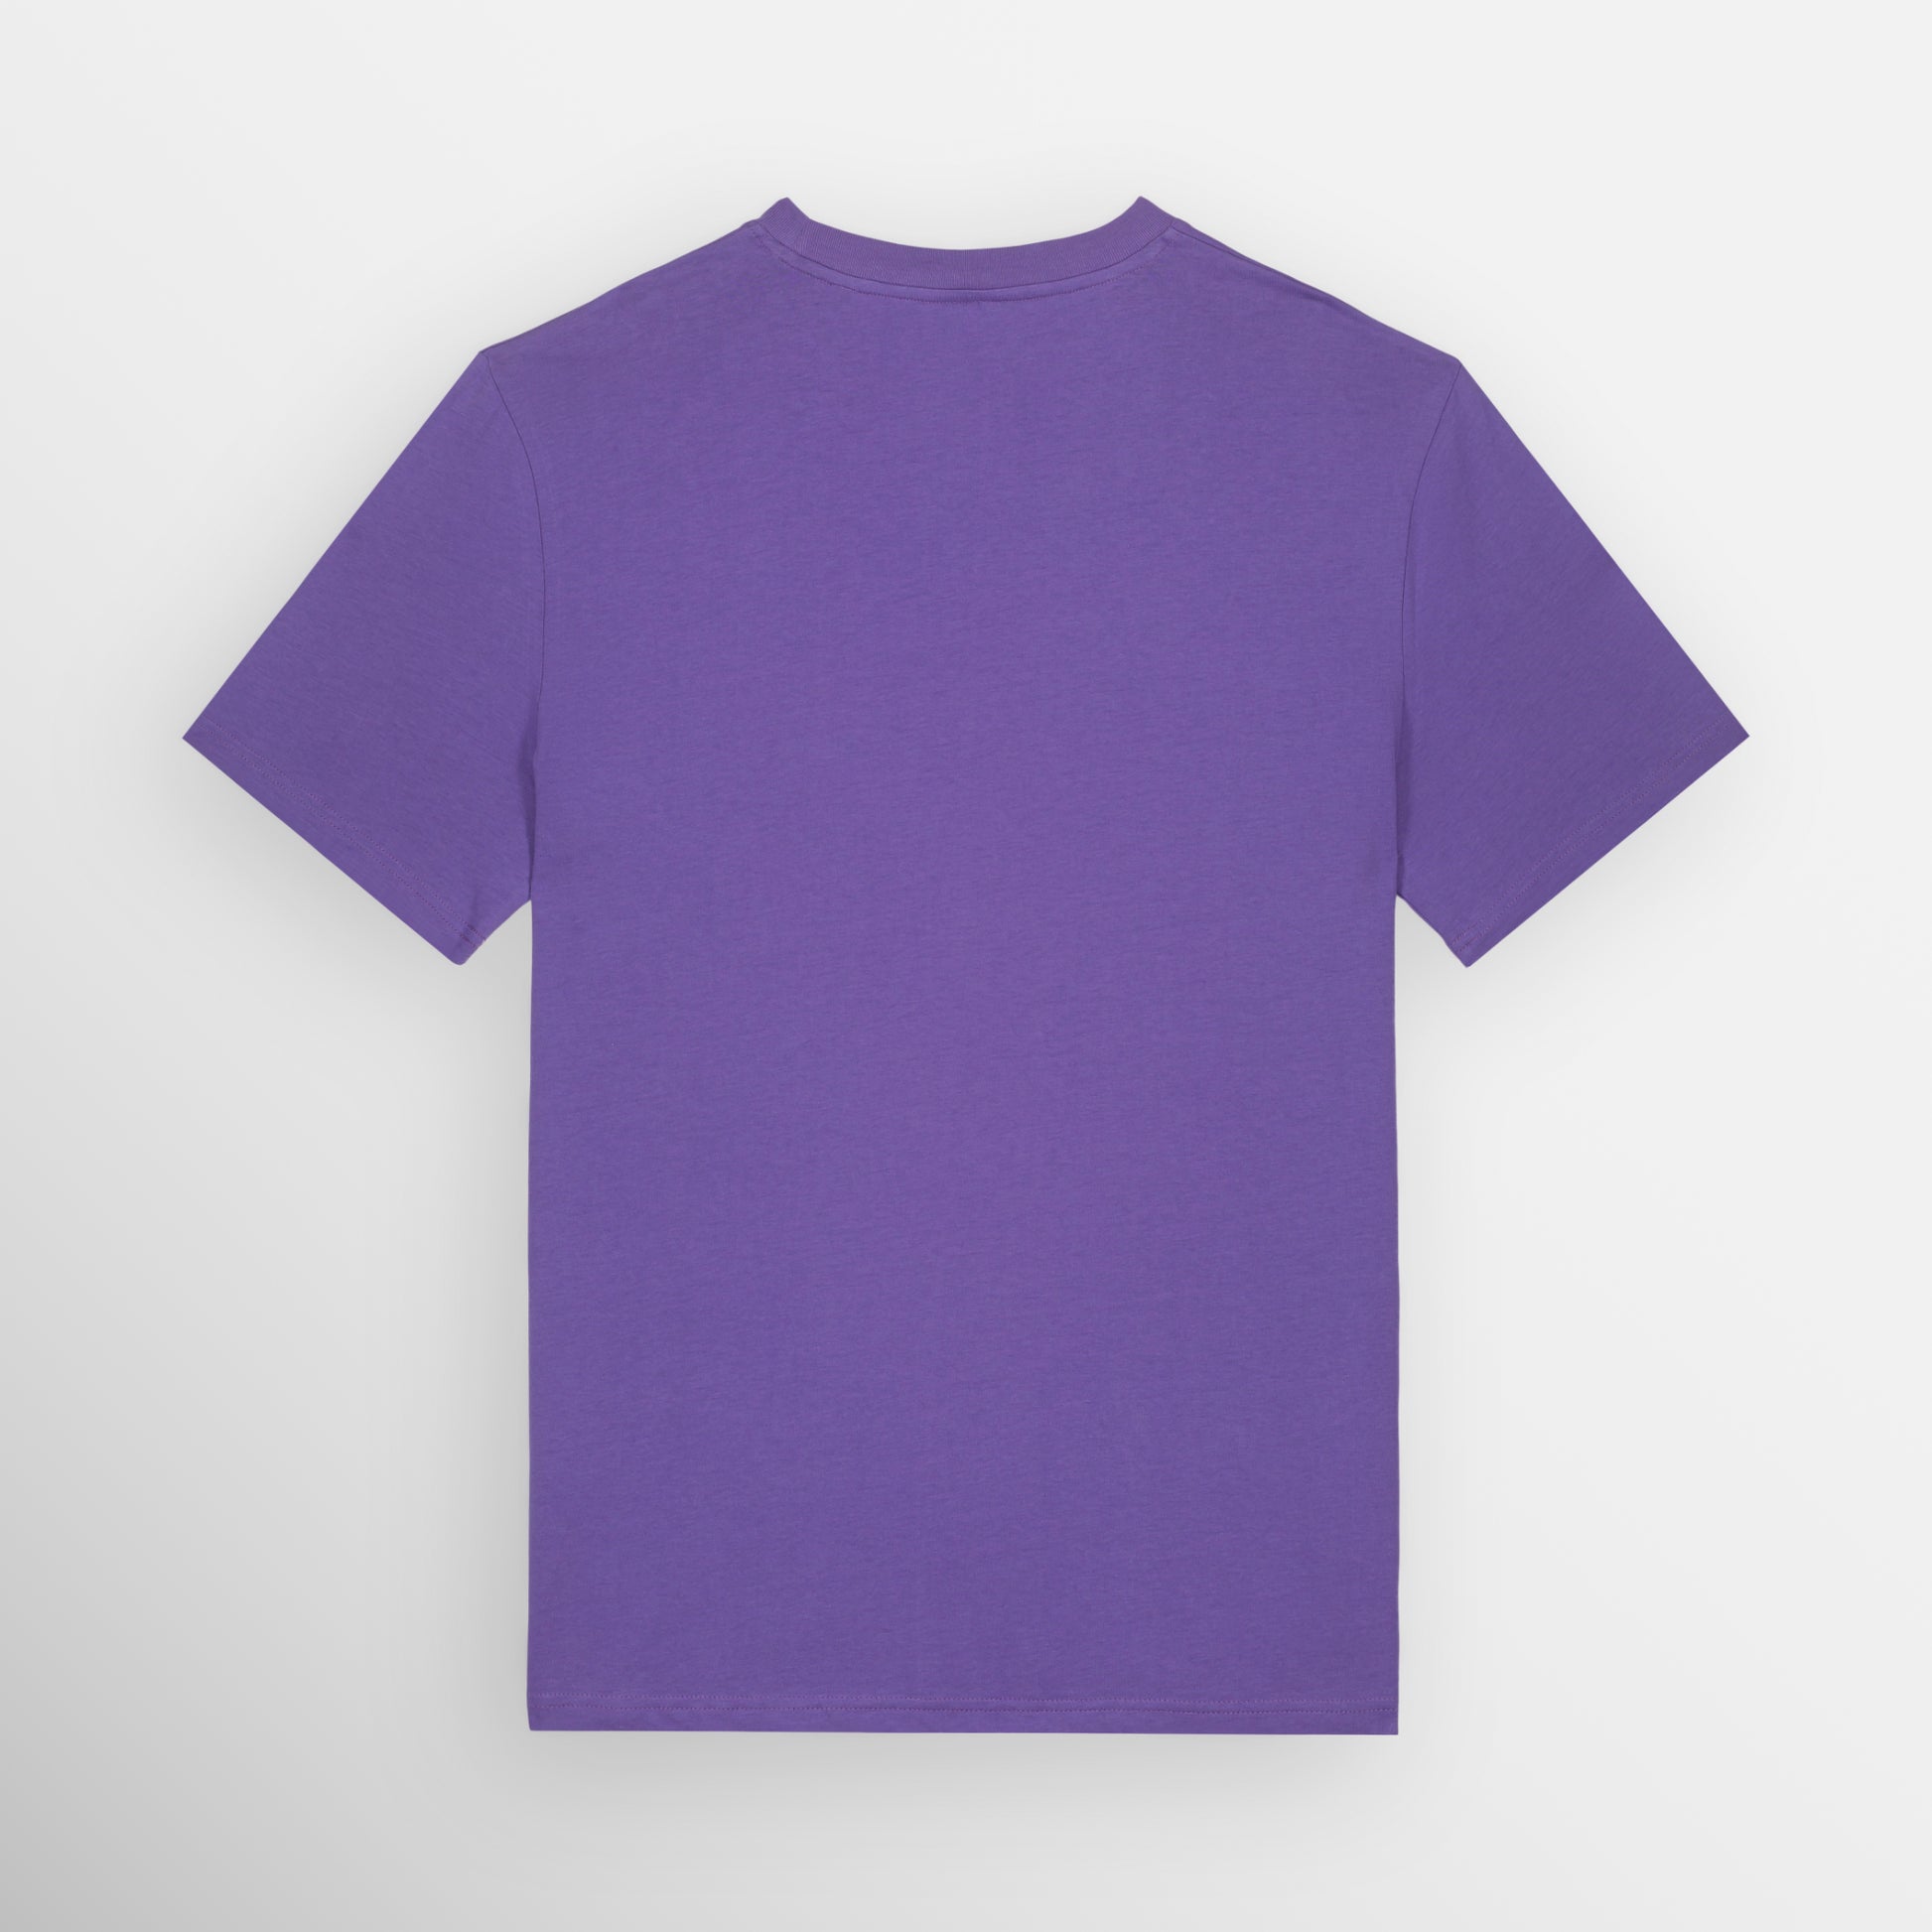 Image shows the plain back of the Purple coloured regular fit t-shirt.